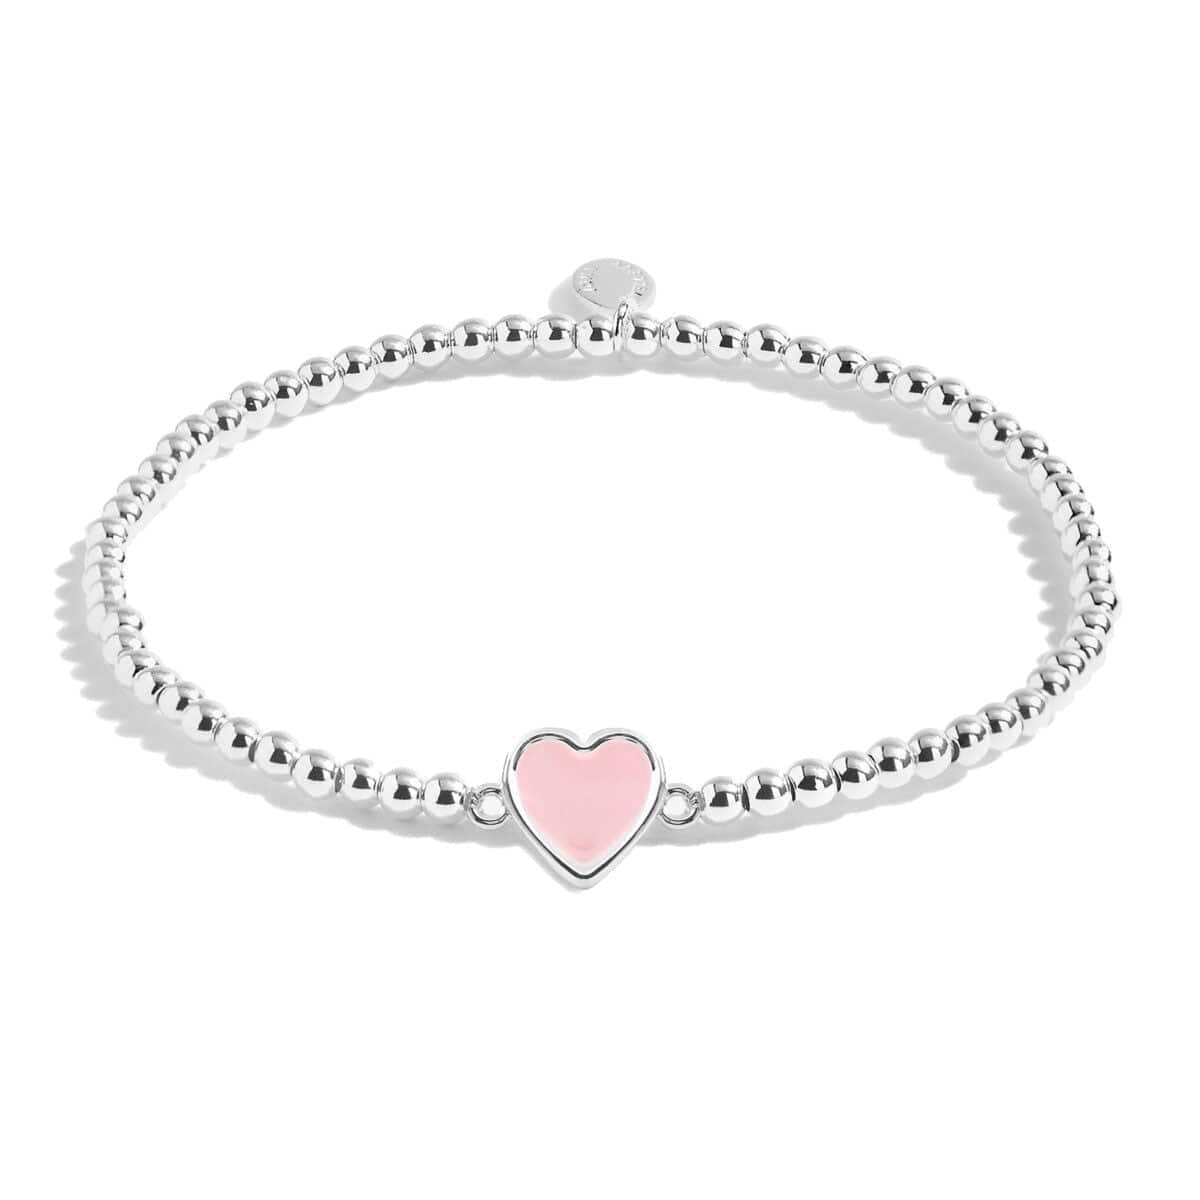 Joma Jewellery Boxed Bracelets Joma Jewellery Childrens From The Heart 'Lots of Love'  Bracelet Gift Box